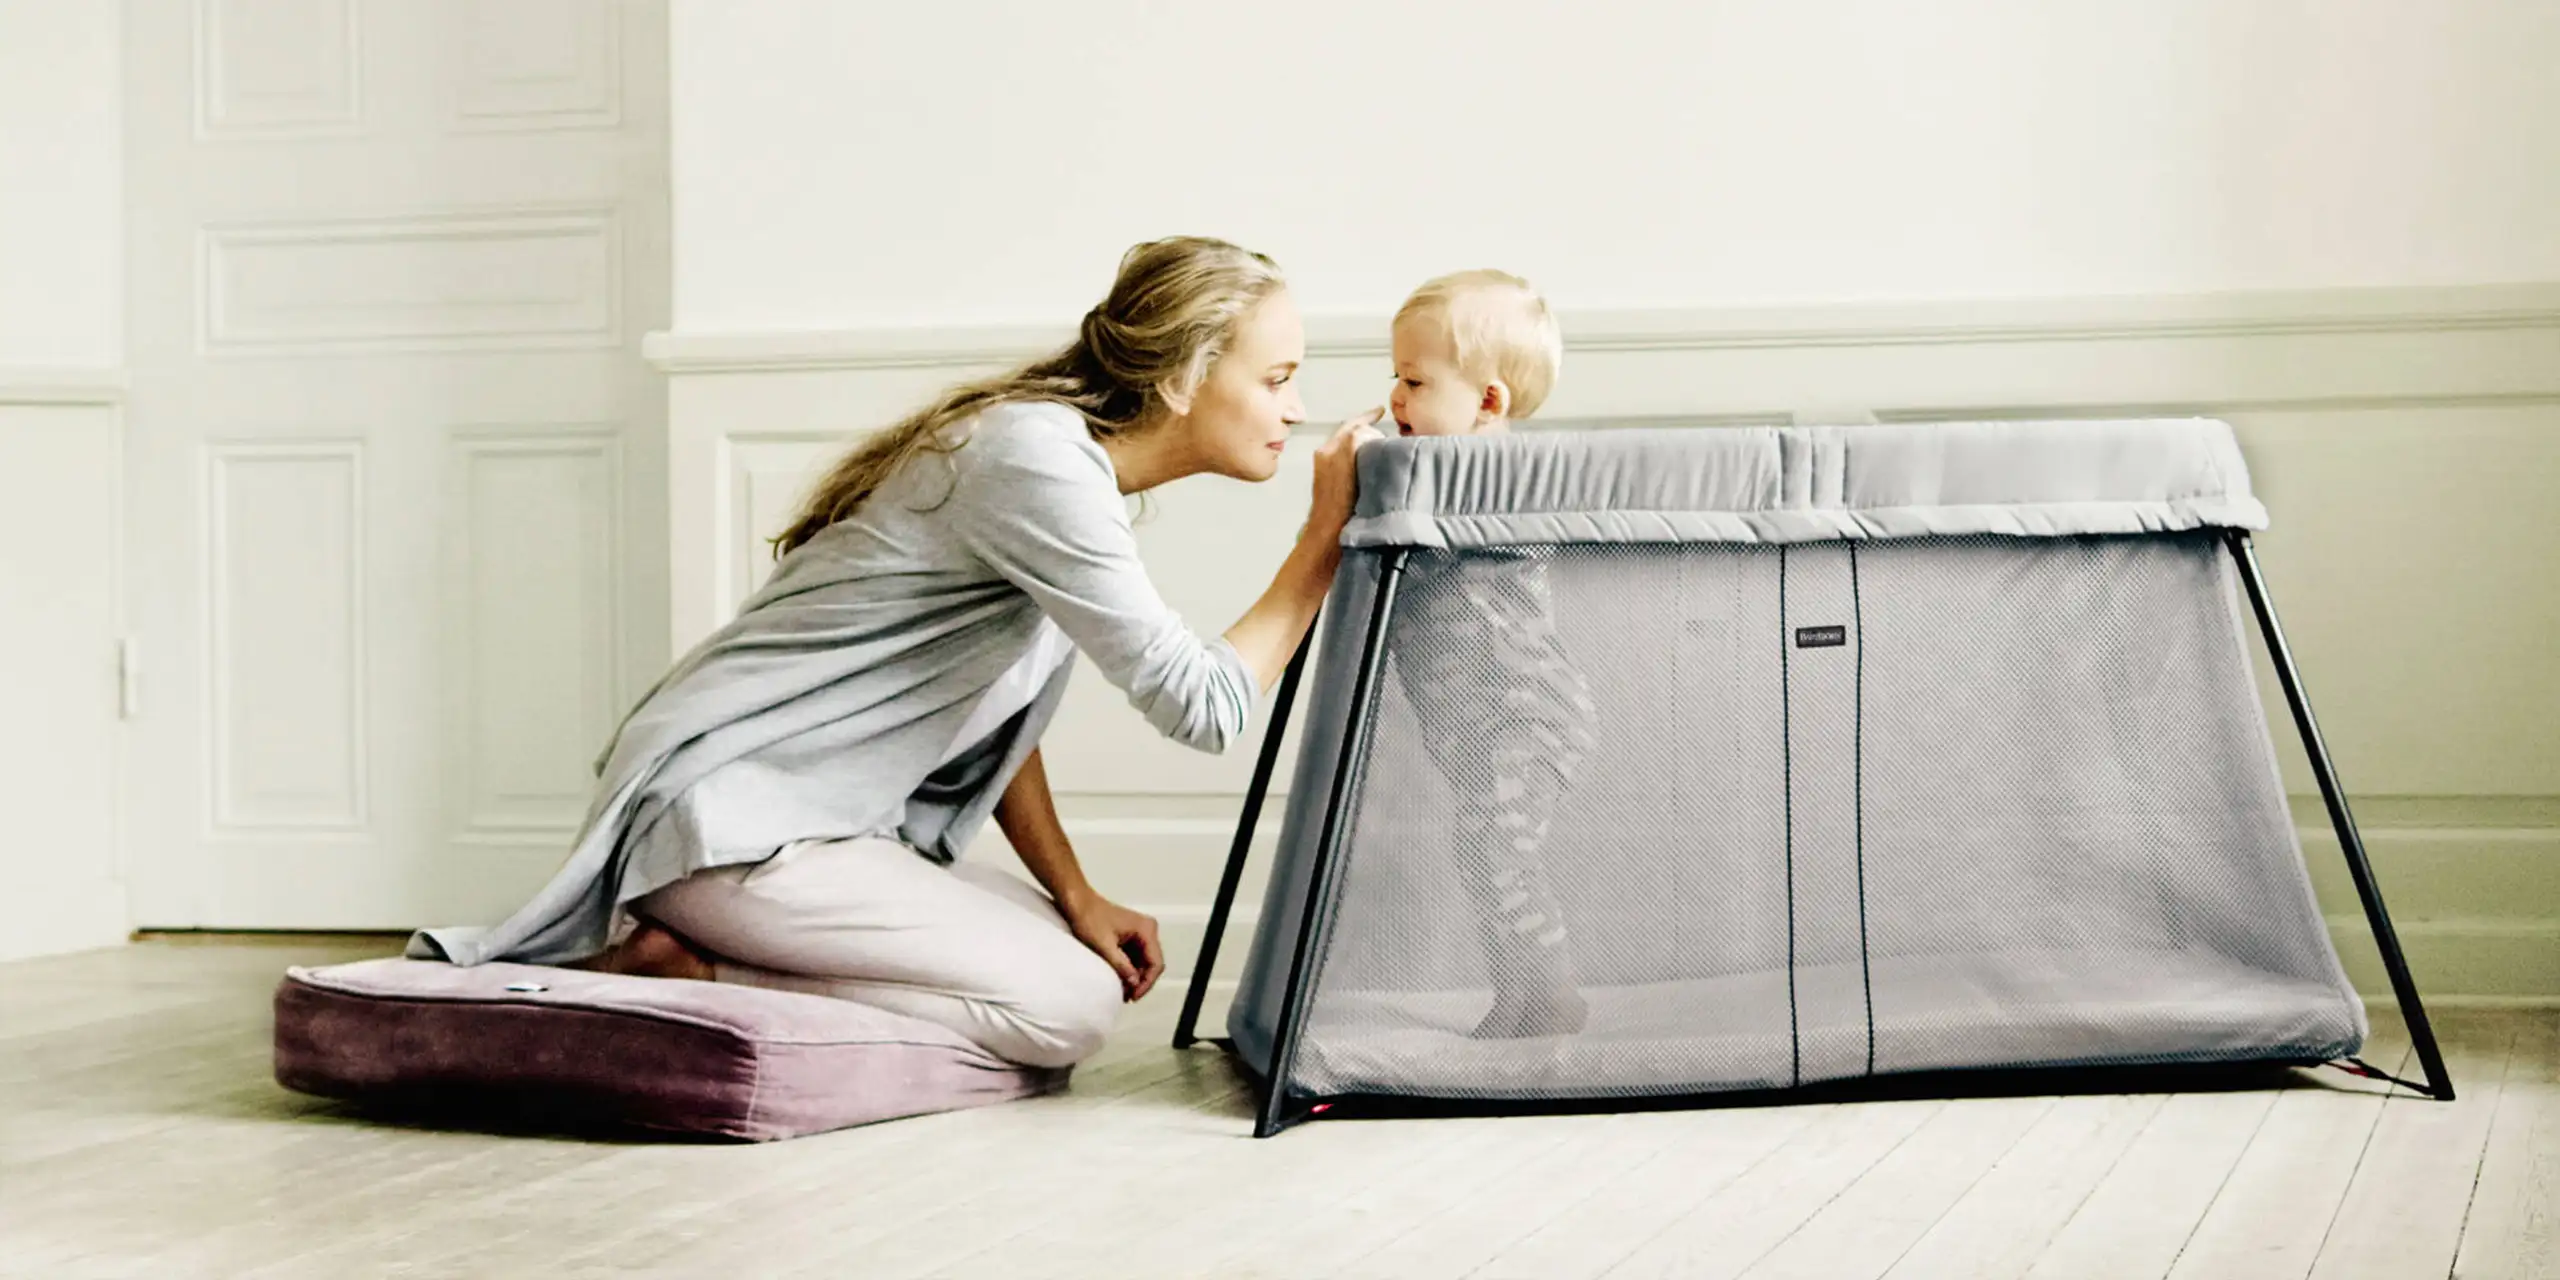 How Does the BabyBjörn Travel Crib Stack Up Against the Best Travel Cribs?